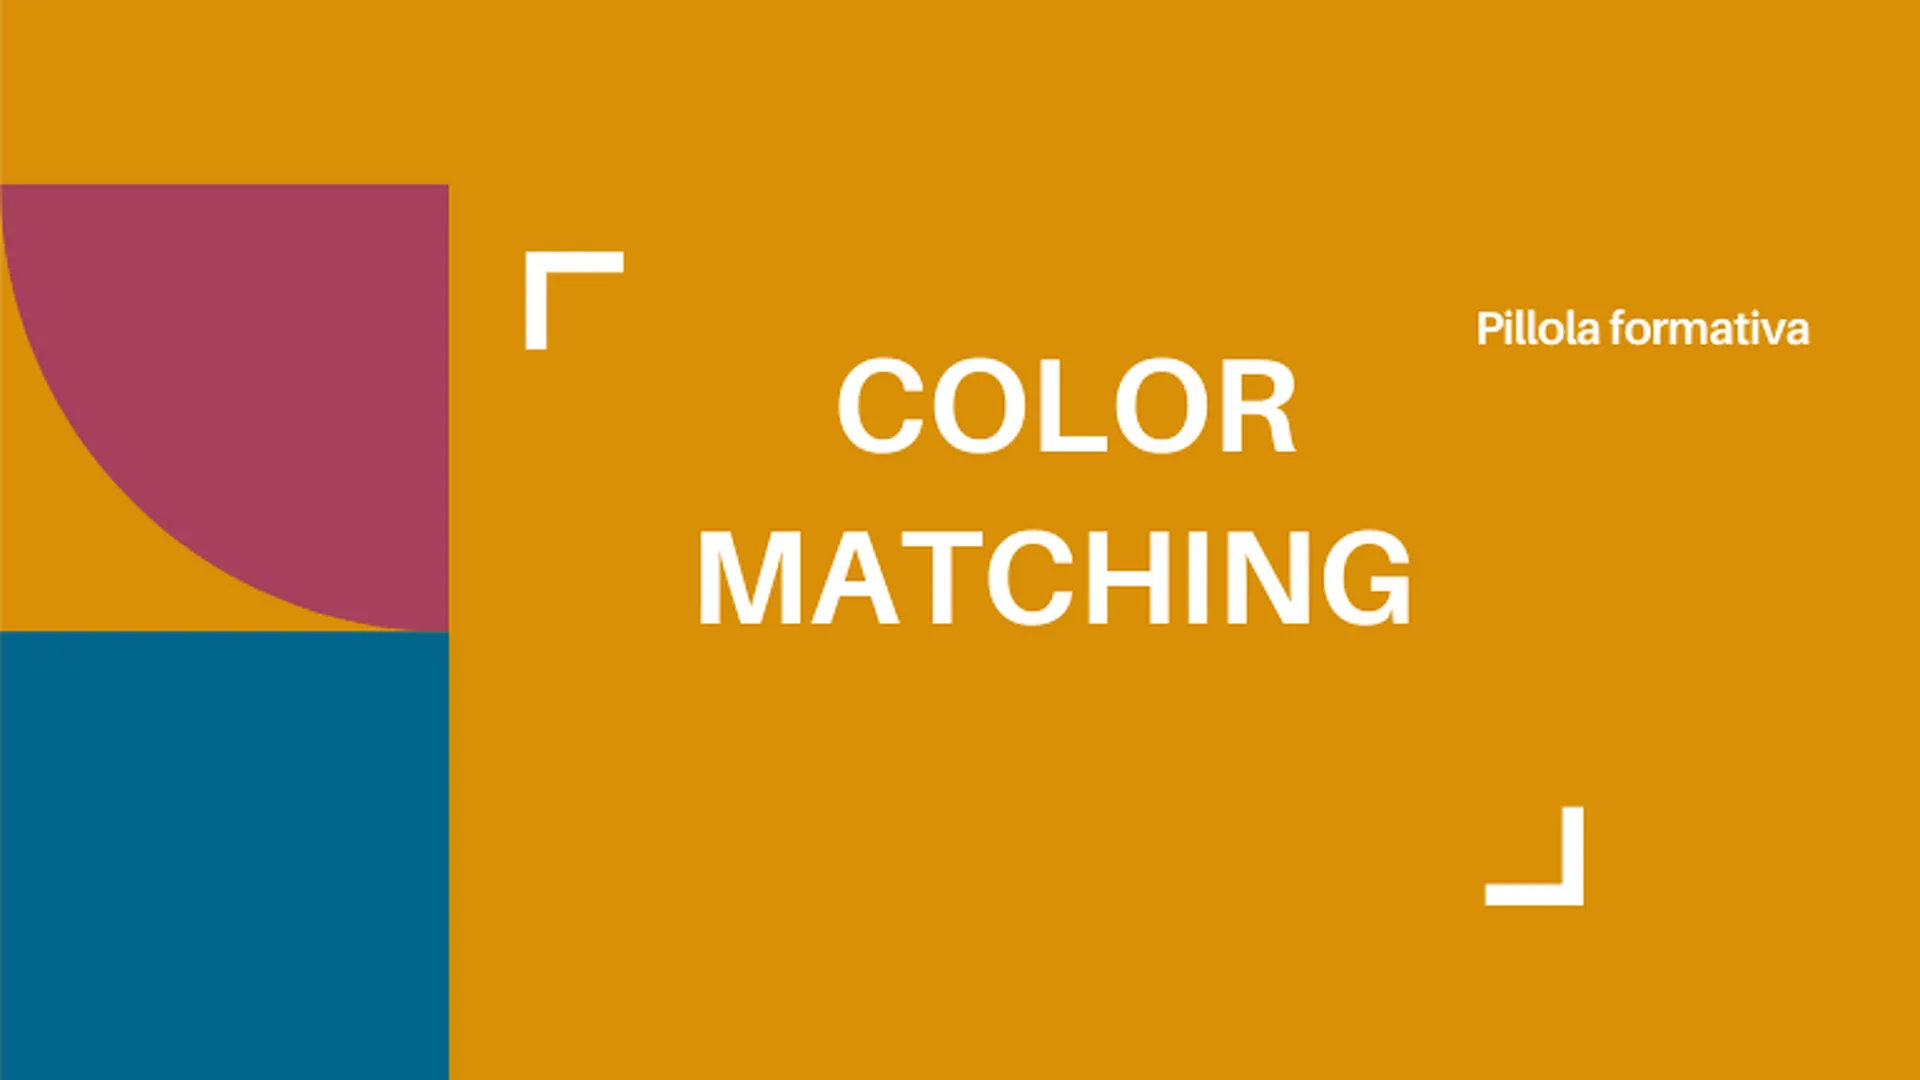 COLOR MATCHING